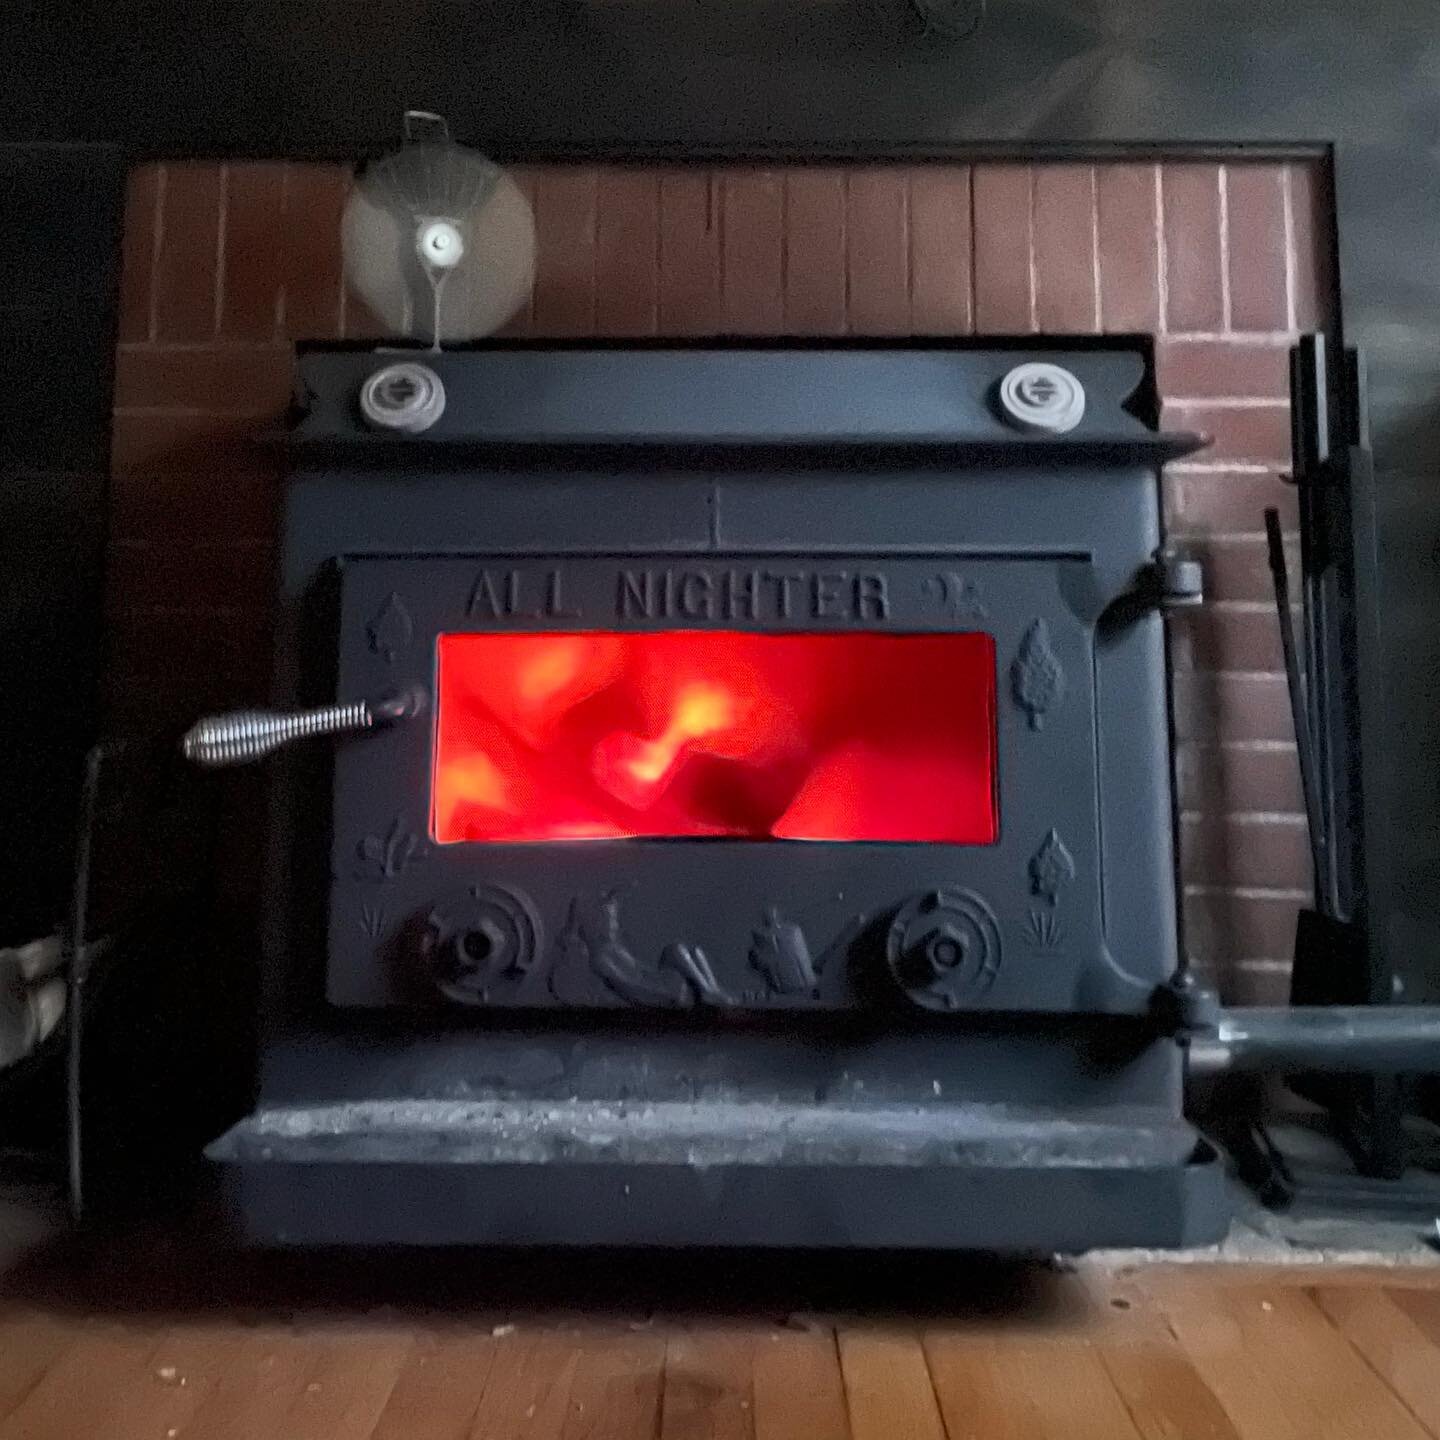 AESTHETIC 
-
&ldquo;Pleasing in appearance: Attractive&rdquo;
-
Follow up to my post last night. Finished up the install on the cold stove early this morning. Set in the rope gasket with the cement, adjusted the fit of the spring handle, and started 